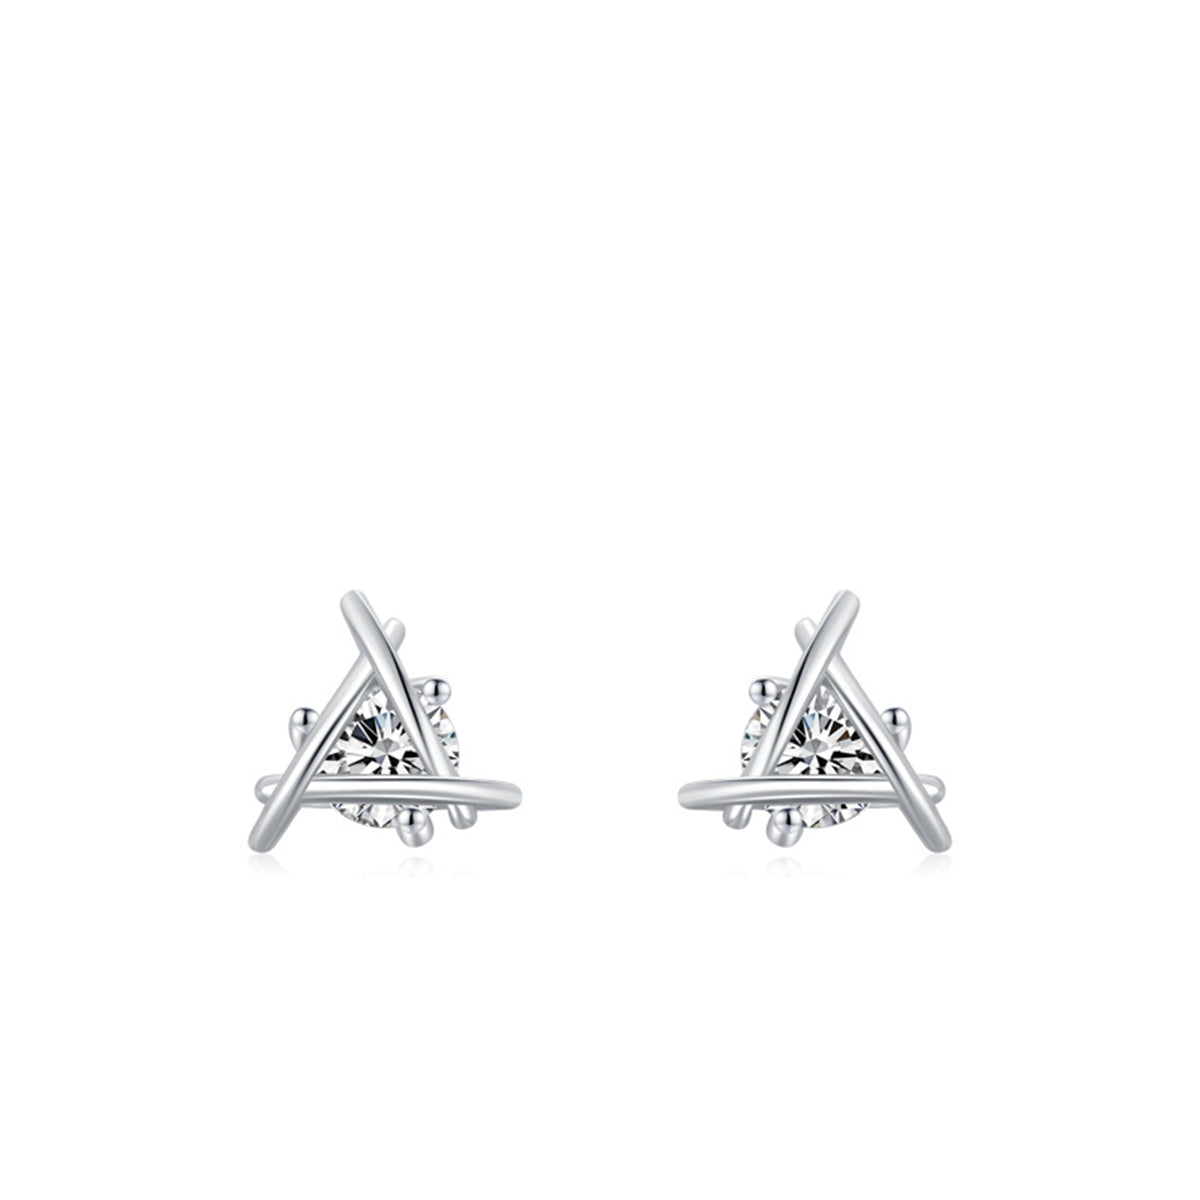 Cubic Zirconia & Silver-Plated Triangle Stud Earrings